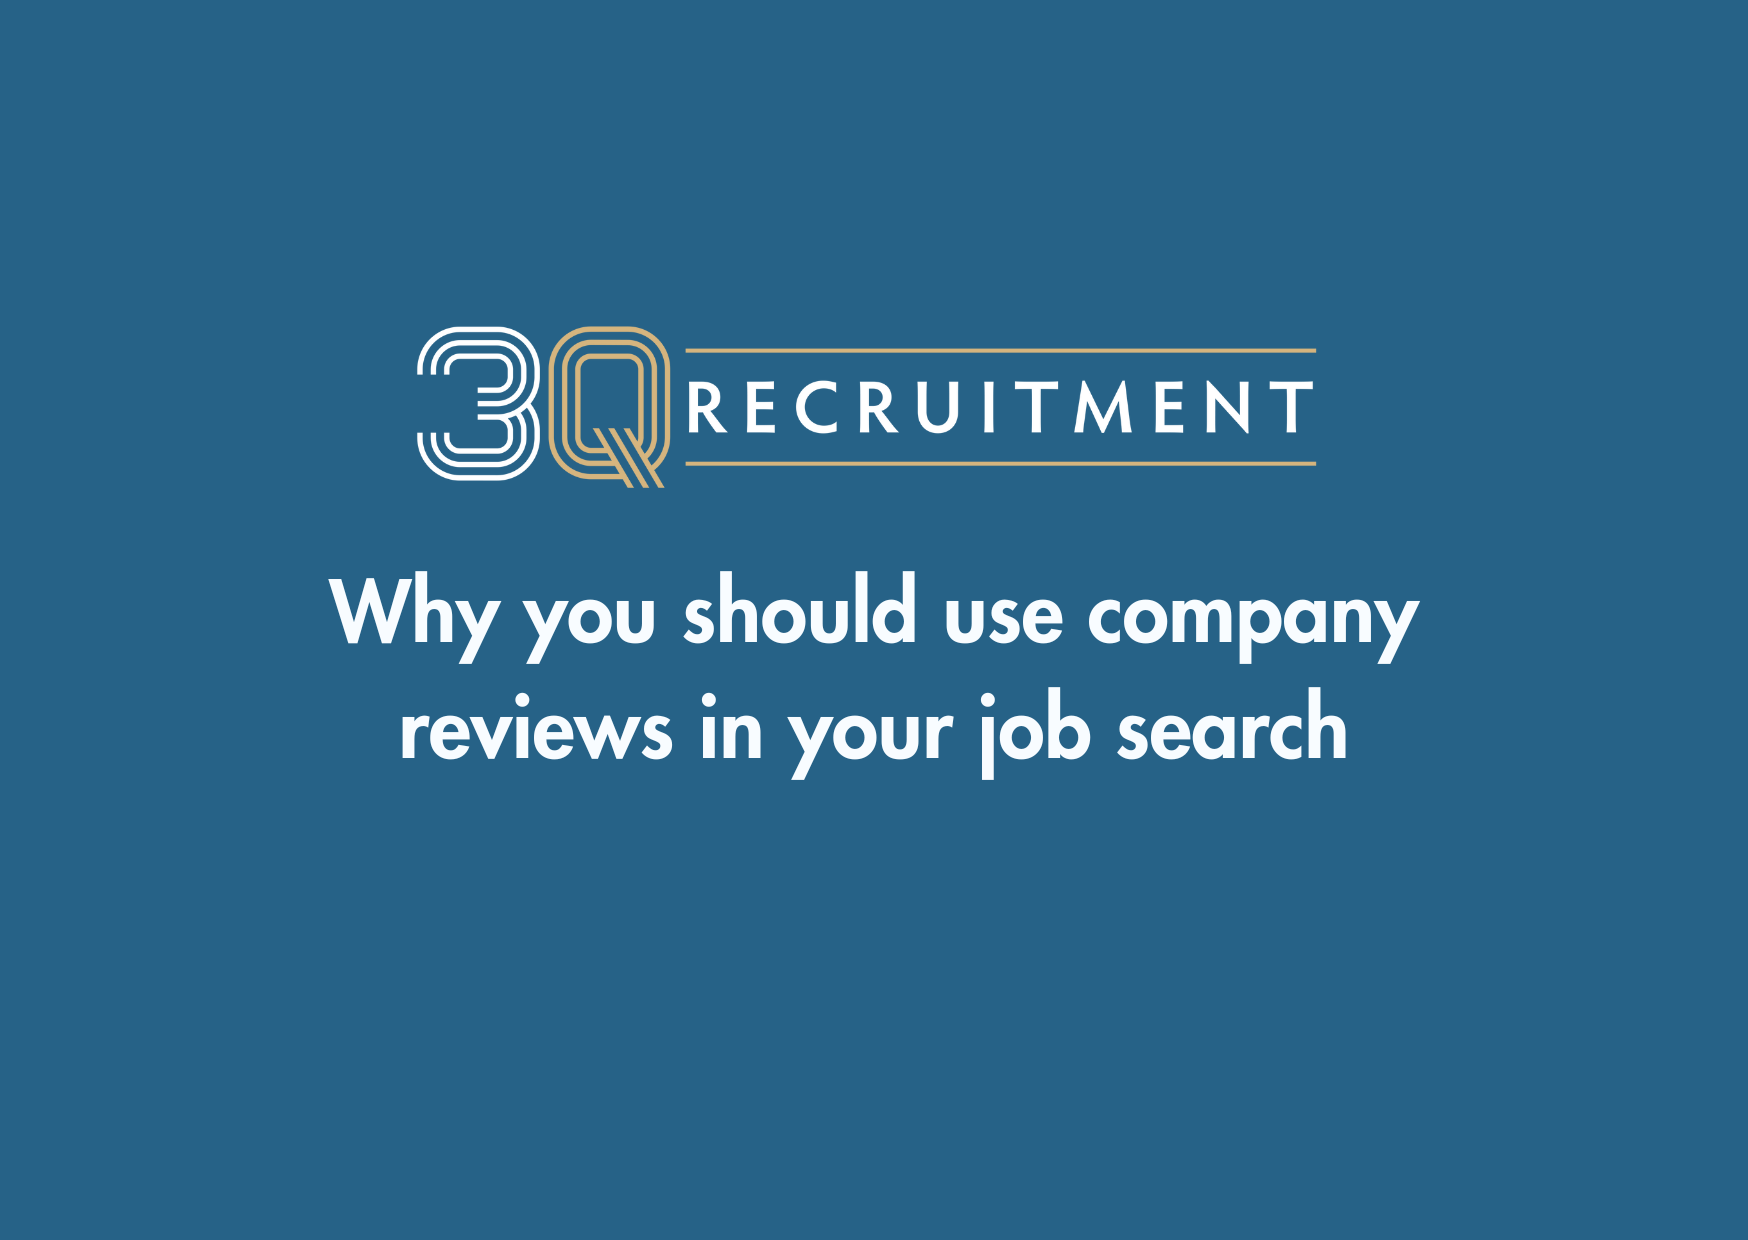 3Q Recruitment Why you should use company reviews in your job search